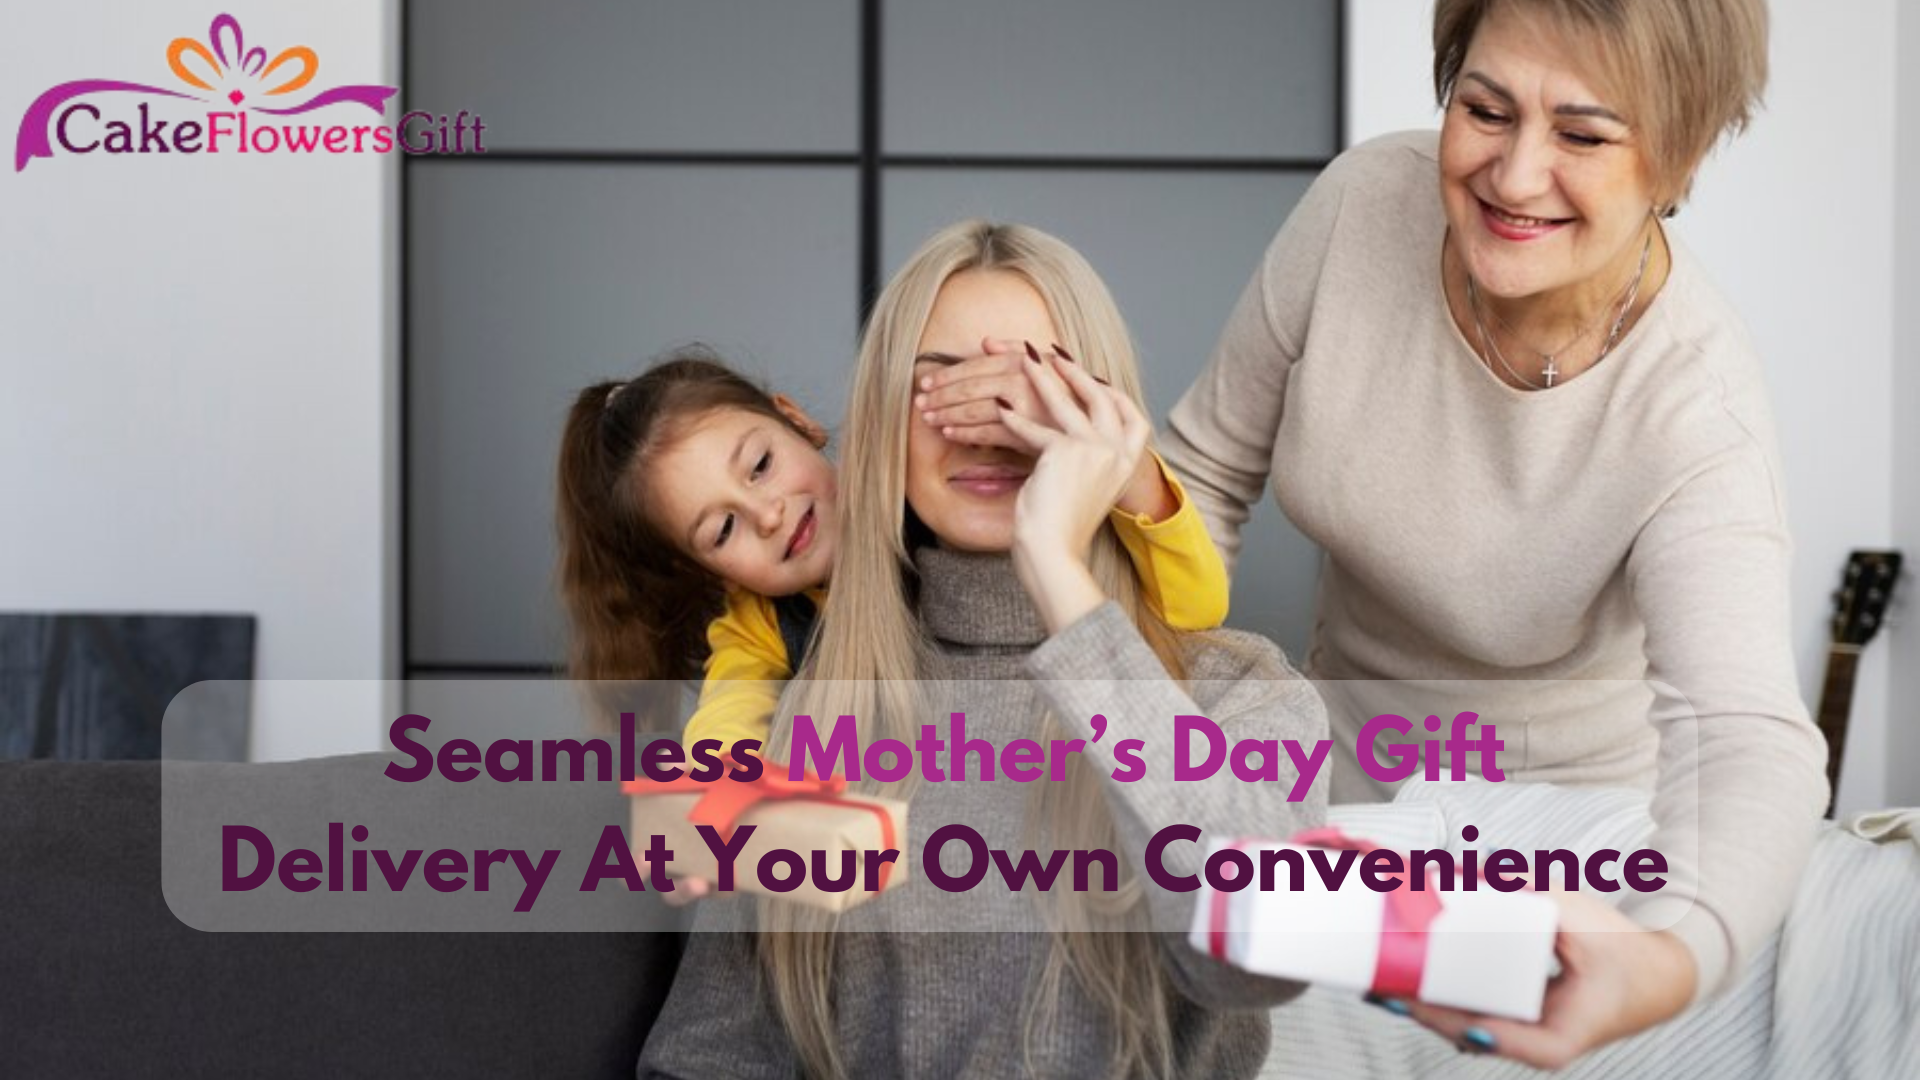 Seamless Mother’s Day Gift Delivery At Your Own Convenience